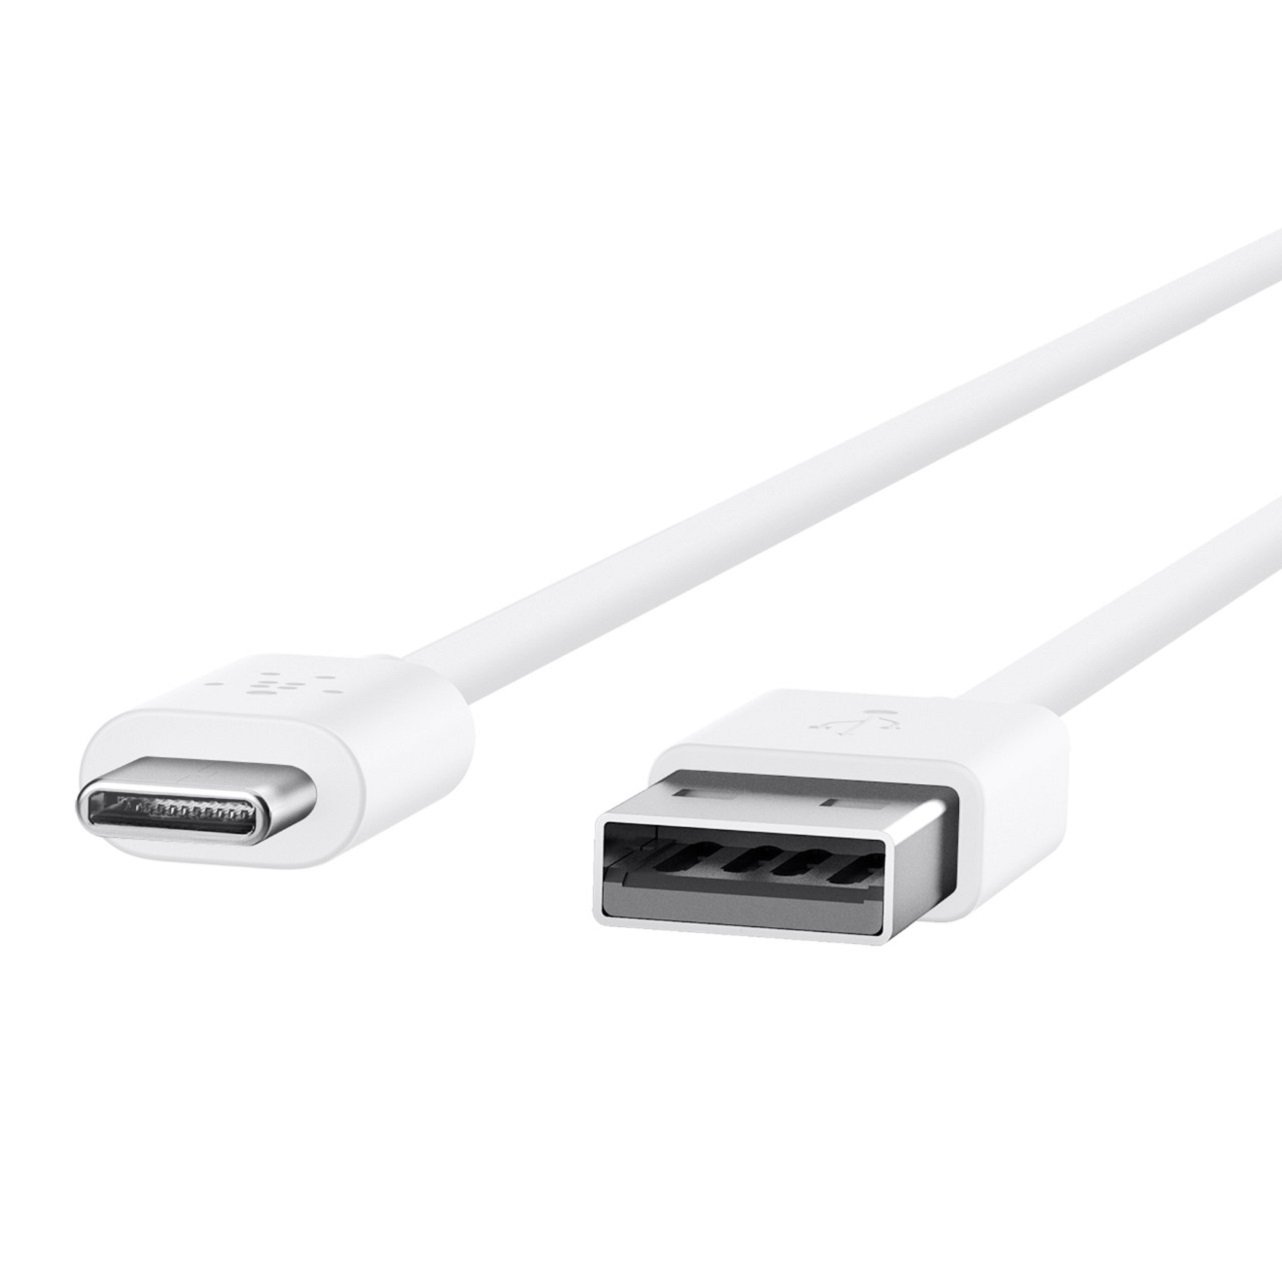 Anyfe MFI Original USB Cable ,High Speed Data and Charging with Micro USB / Type C / Lightning Cables